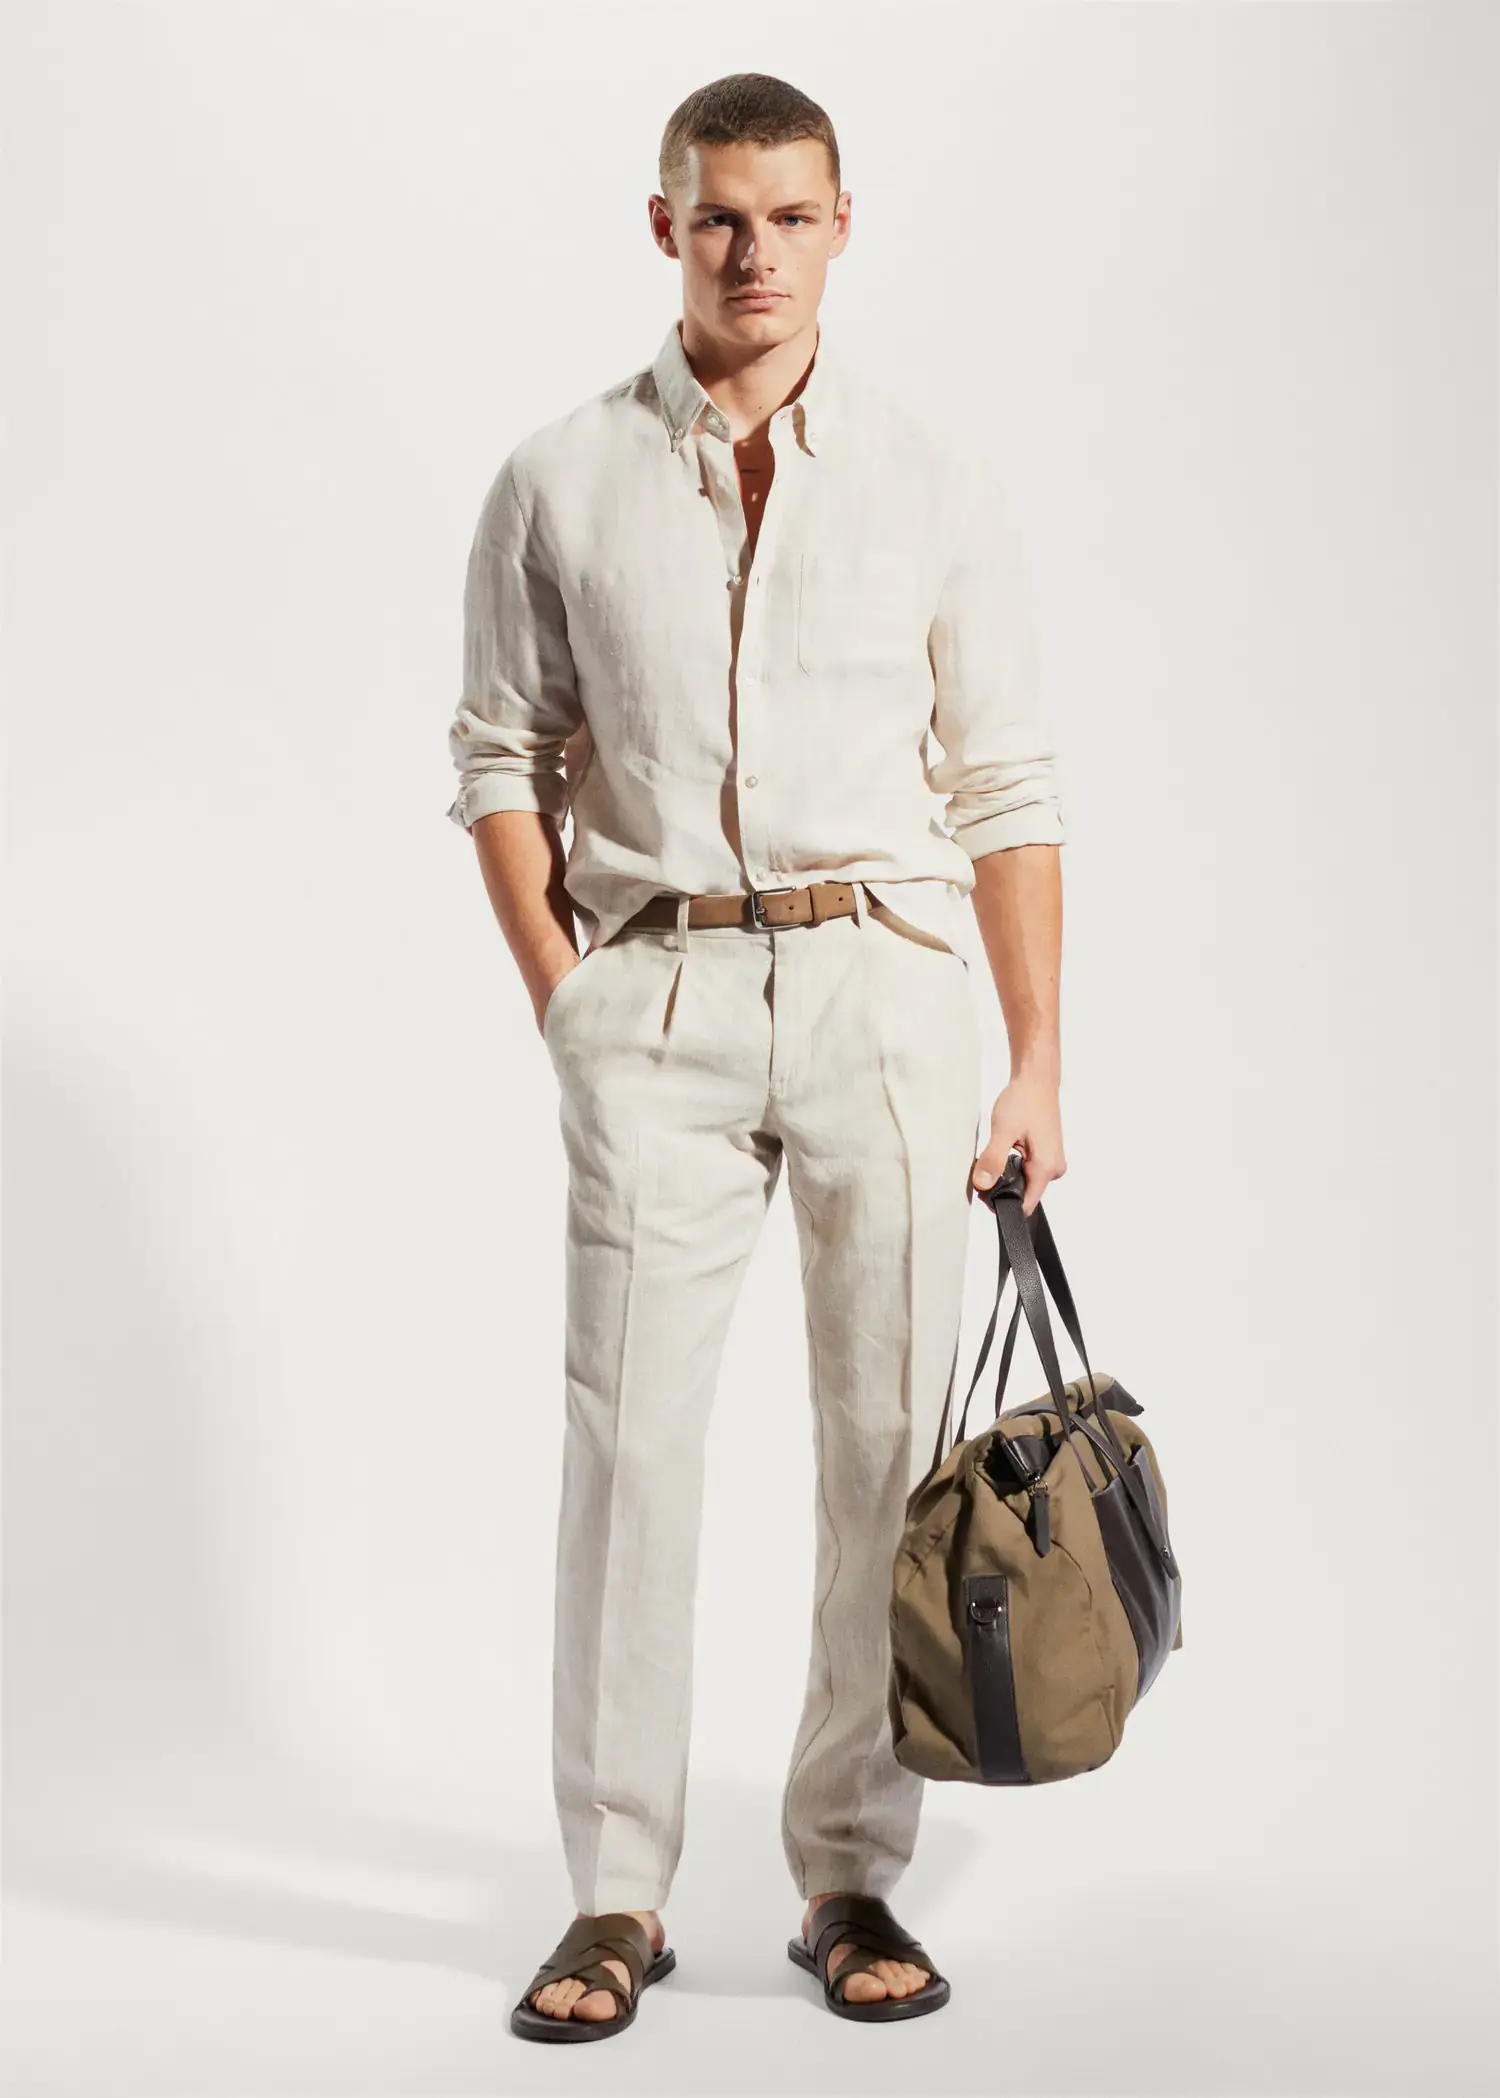 Mango 100% linen slim-fit shirt. a man holding a bag while standing in a room. 